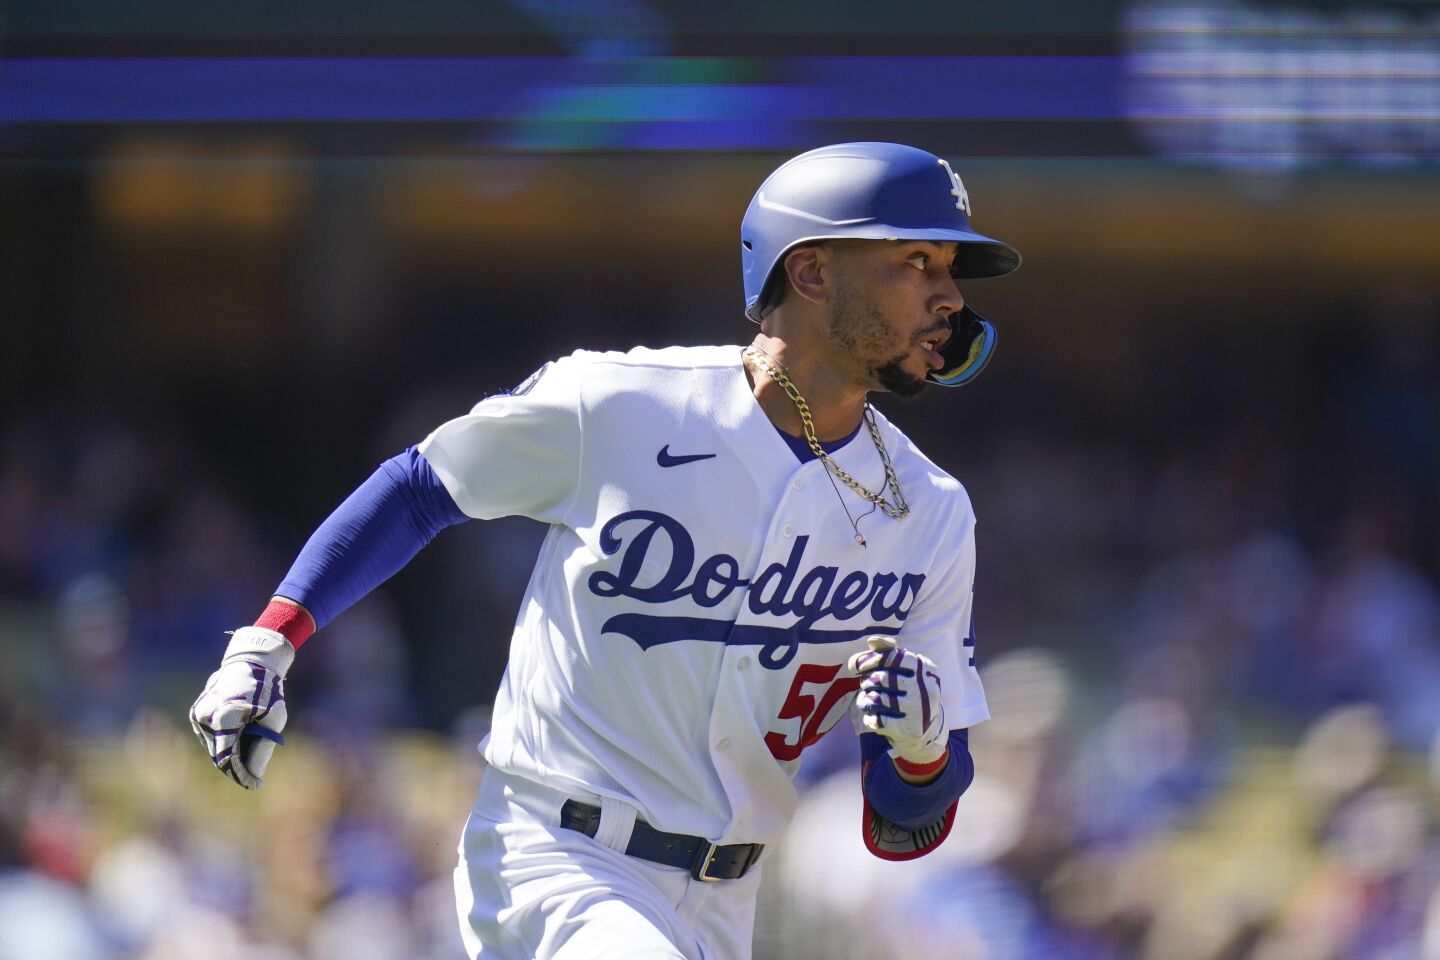 Trending: Los AngelesOF Mookie Betts (pictured) leads the team with 35 homers, while four other Dodgers – C Will Smith (23), 3B Max Muncy (21), 1B Freddie Freeman (20) and SS Trea Turner (20) – all have at least 20 homers. Turner leads the team with 97 RBIs and 25 steals and Freeman is tops with a .922 OPS. 3B Justin Turner, however, has been the Dodgers’ most dangerous hitter this month, pairing four homers and 15 RBIs with a .361/.434/.639 batting line. With 22 saves in 27 chances and a 4.07, RHP Craig Kimbrel has been removed as the team’s closer. Manager Dave Roberts expects a committee situation, but LHP Alex Vesia (1.08 ERA in September), RHP Evan Phillips (1.23) and RHP Chris Martin (1.69) are all thriving this month.